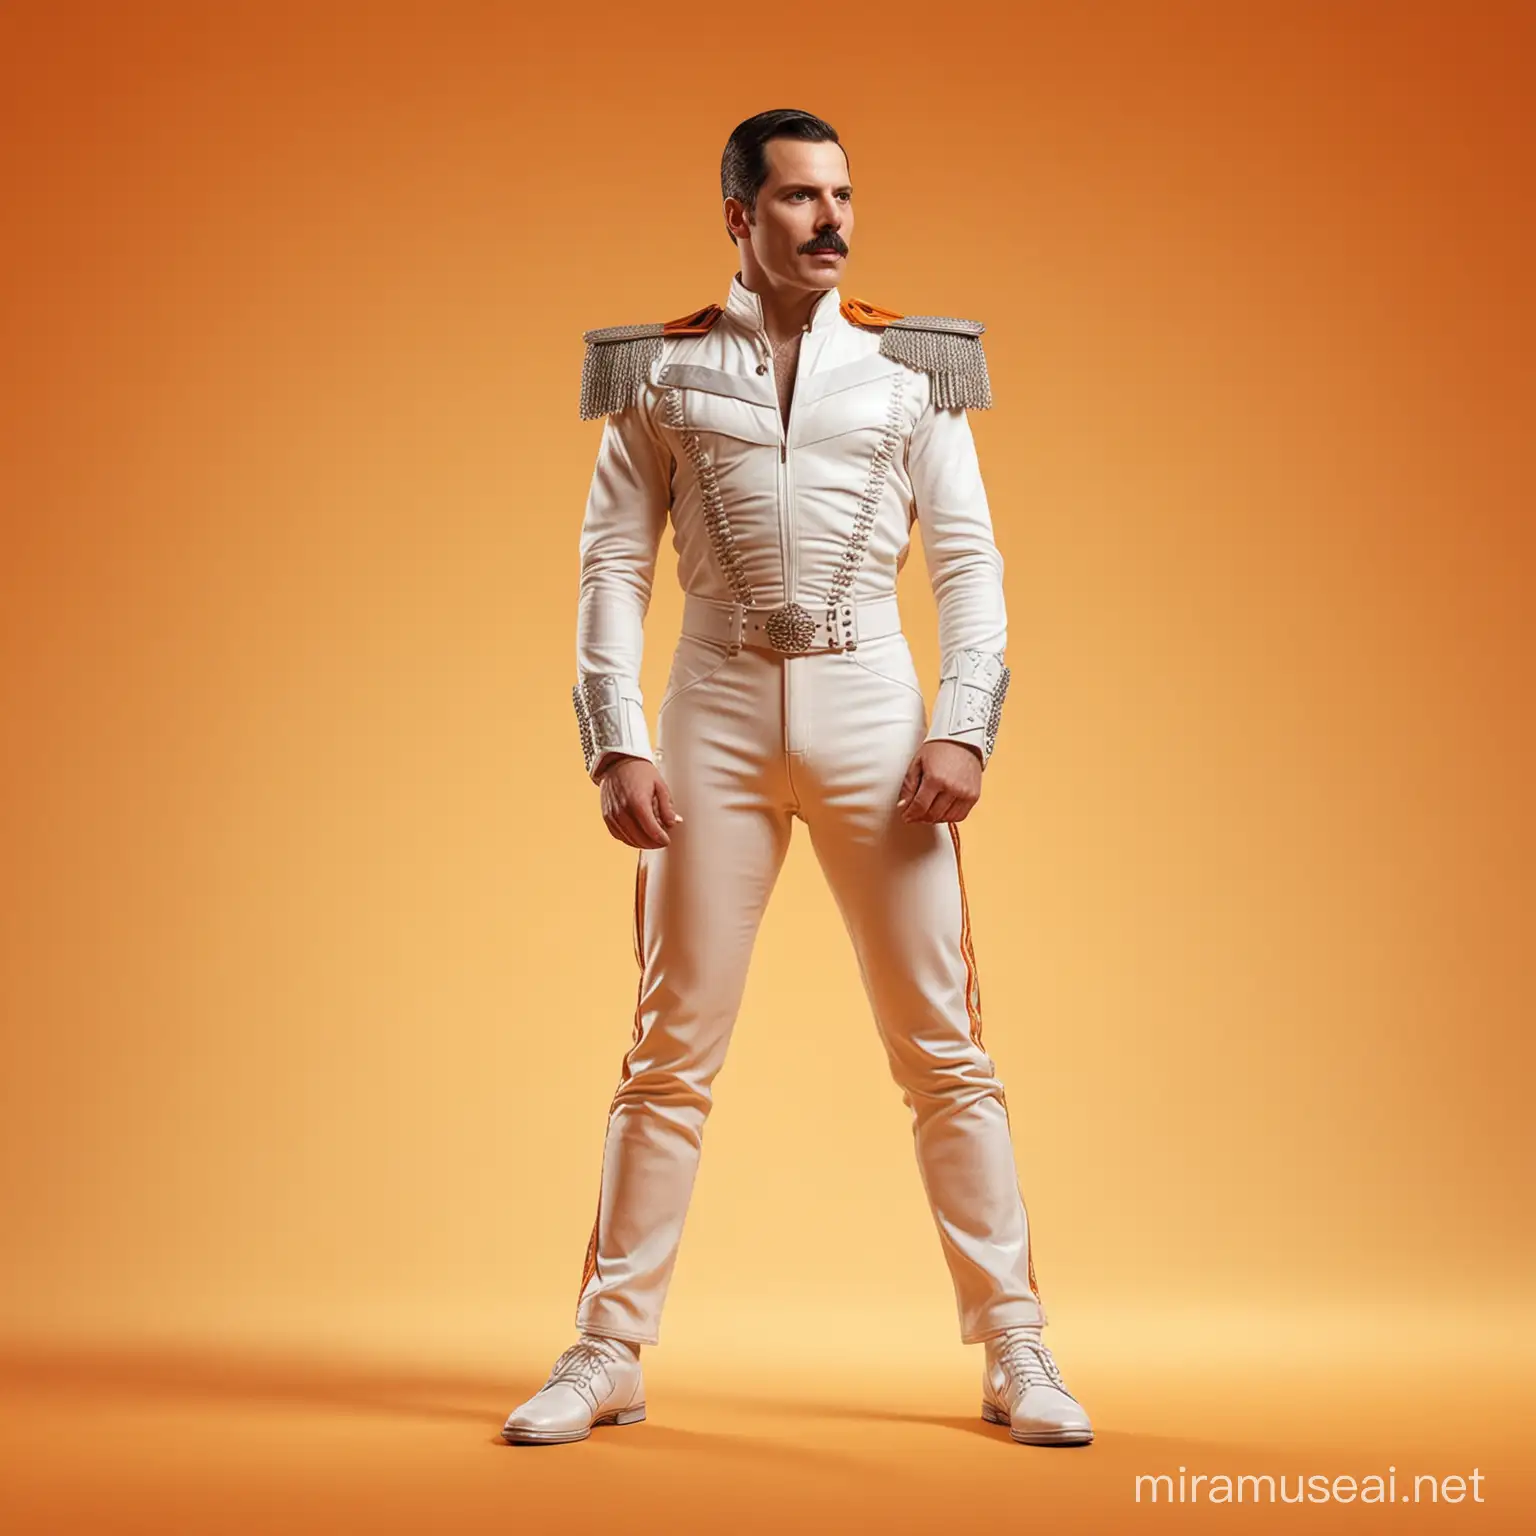 Freddie Mercury in full height  in a white costume on an orange-colored background in a realistic cinematic style
